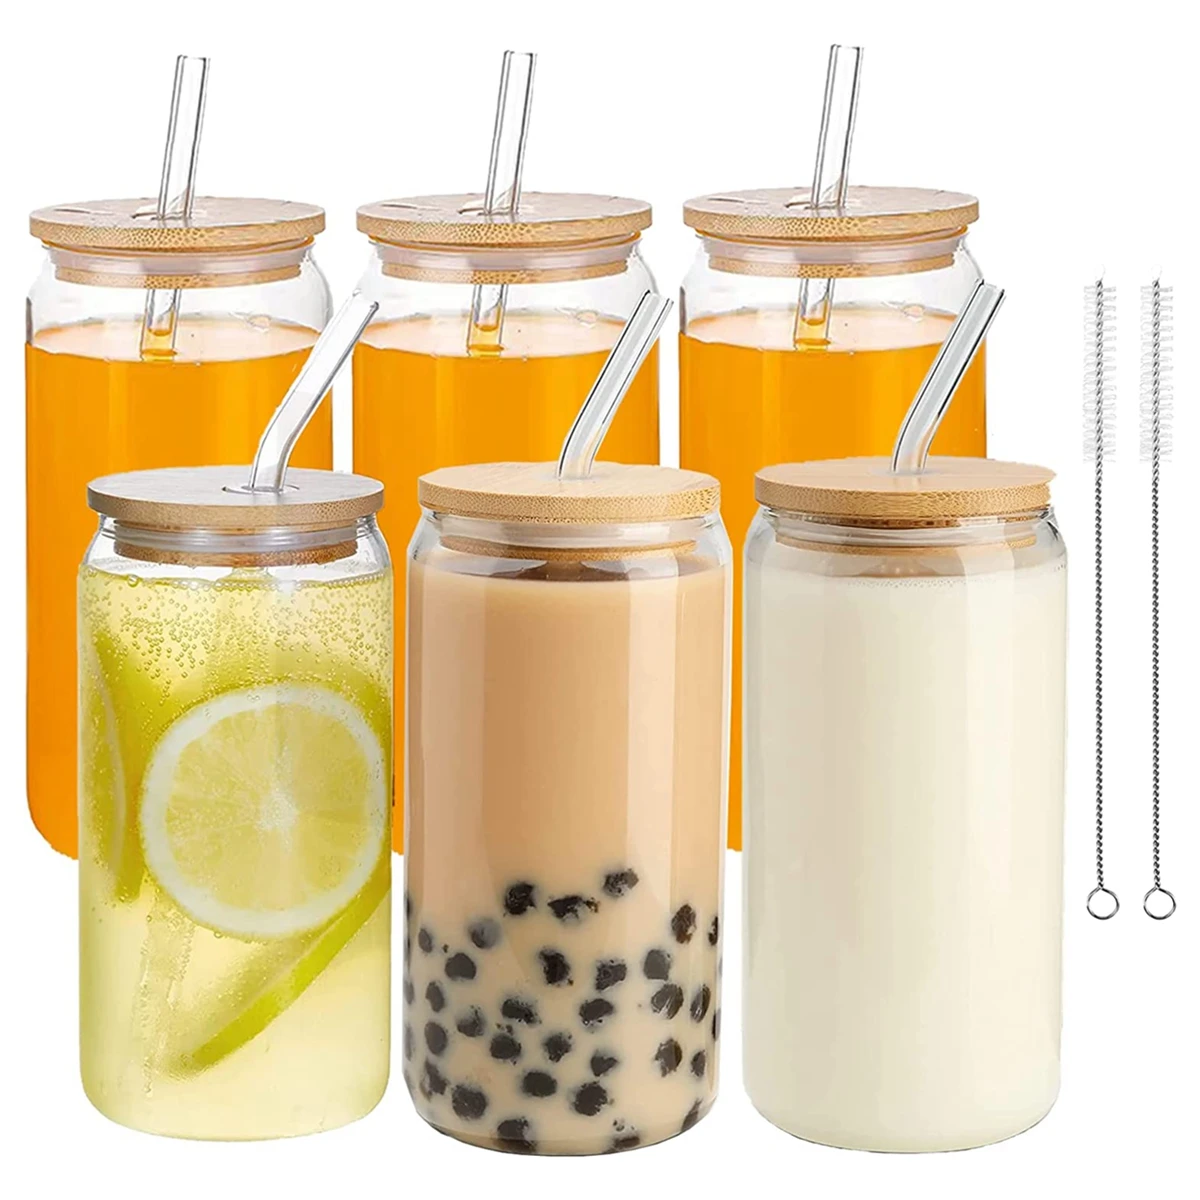 

6pcs Glass Straw Cup Glasses Cup with Straws and Bamboo Lids Drinking Glasses for Coffee Beer Cocktail Wine Soda Coke Glass Cup